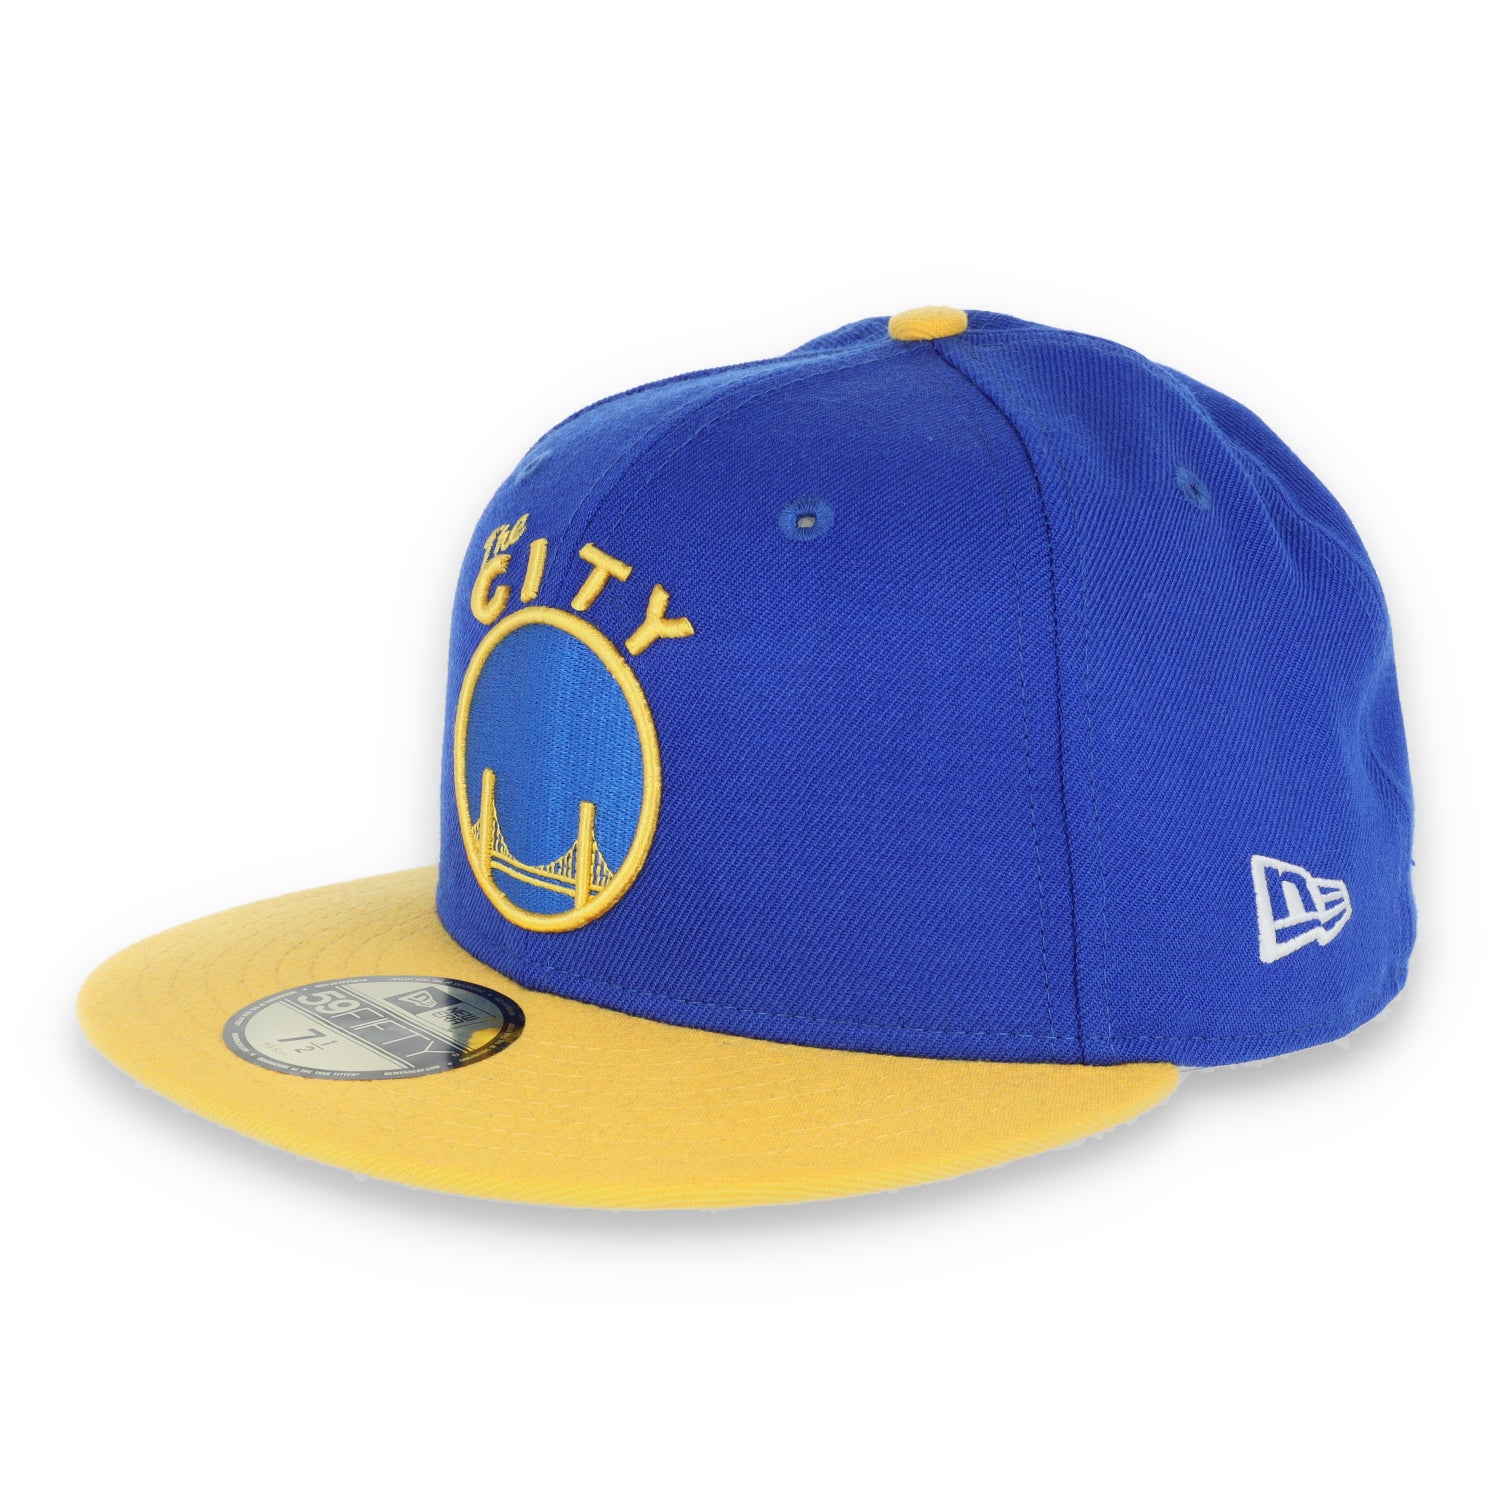 GOLDEN STATE WARRIORS NEW ERA 59FIFTY HAT THE CITY-BLUE/YELLOW